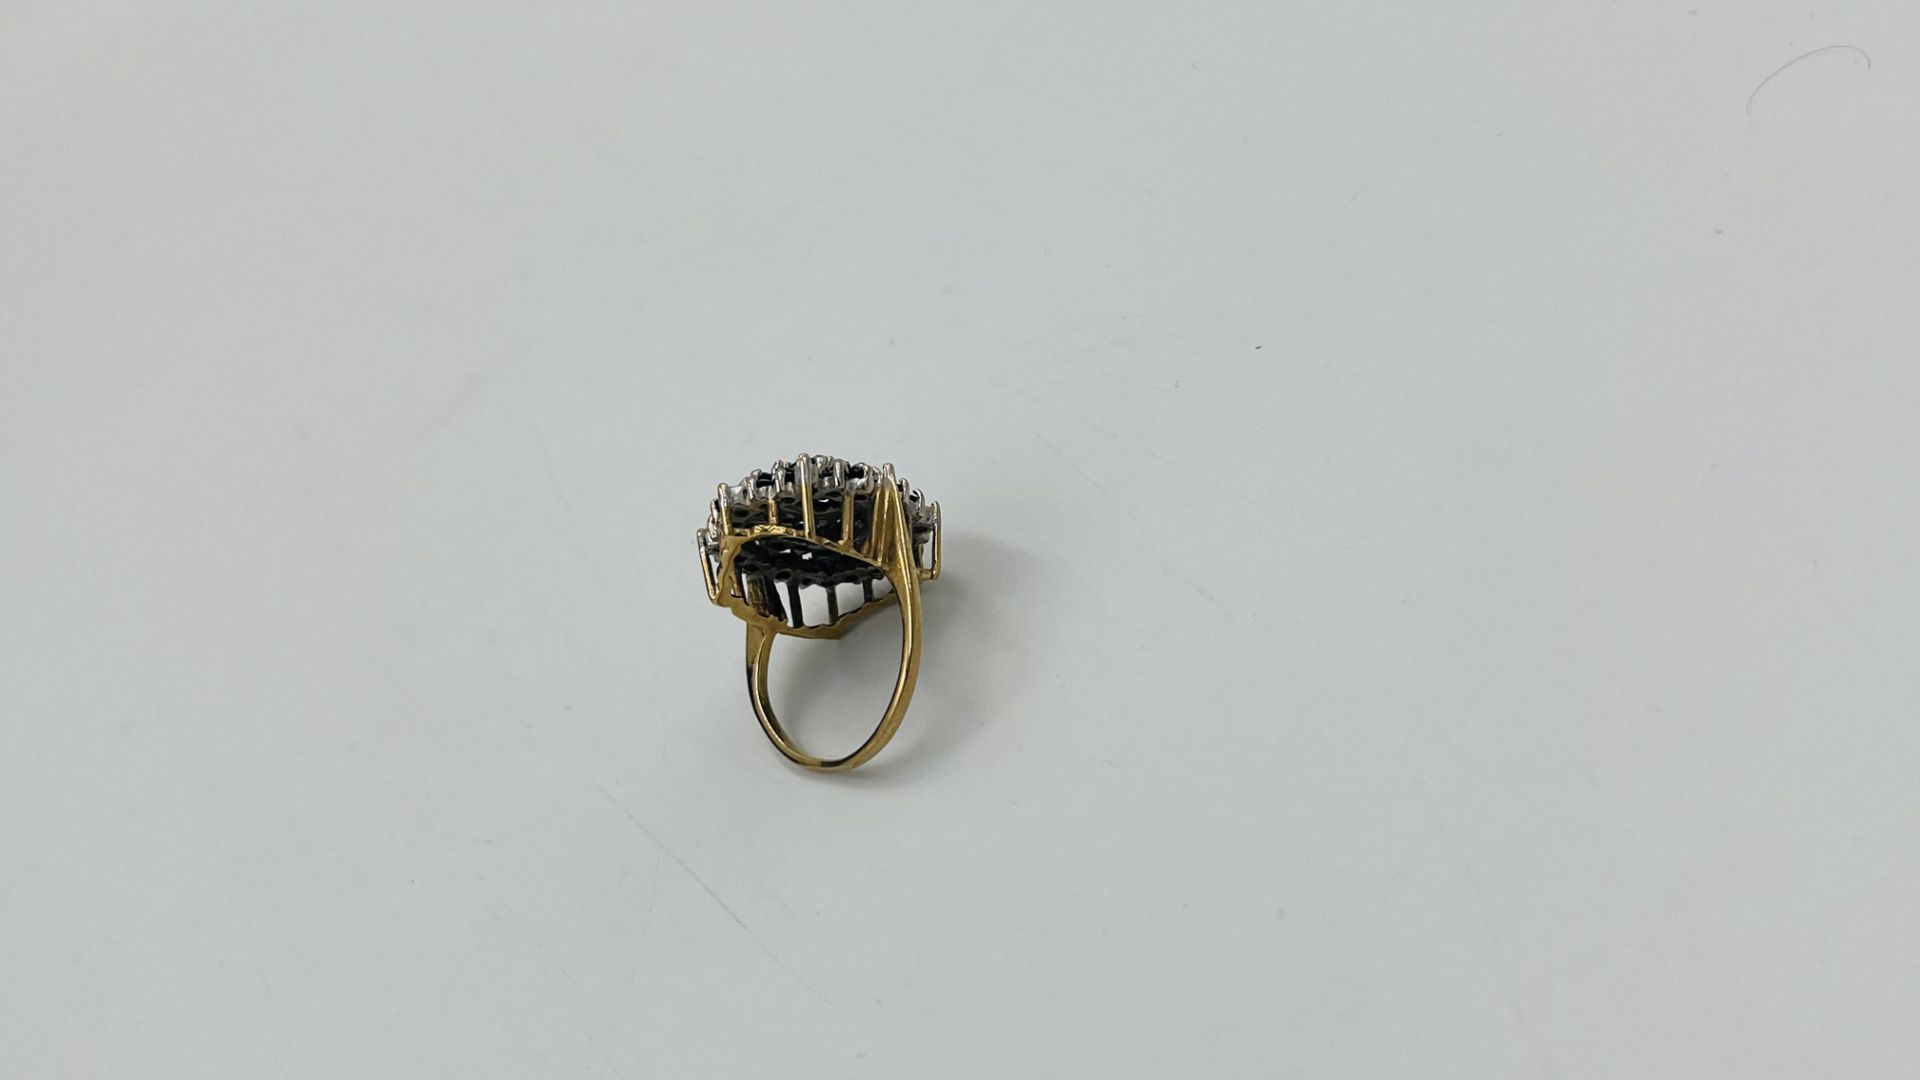 9ct gold, sapphire and diamond cocktail ring with matching earrings - Image 4 of 5